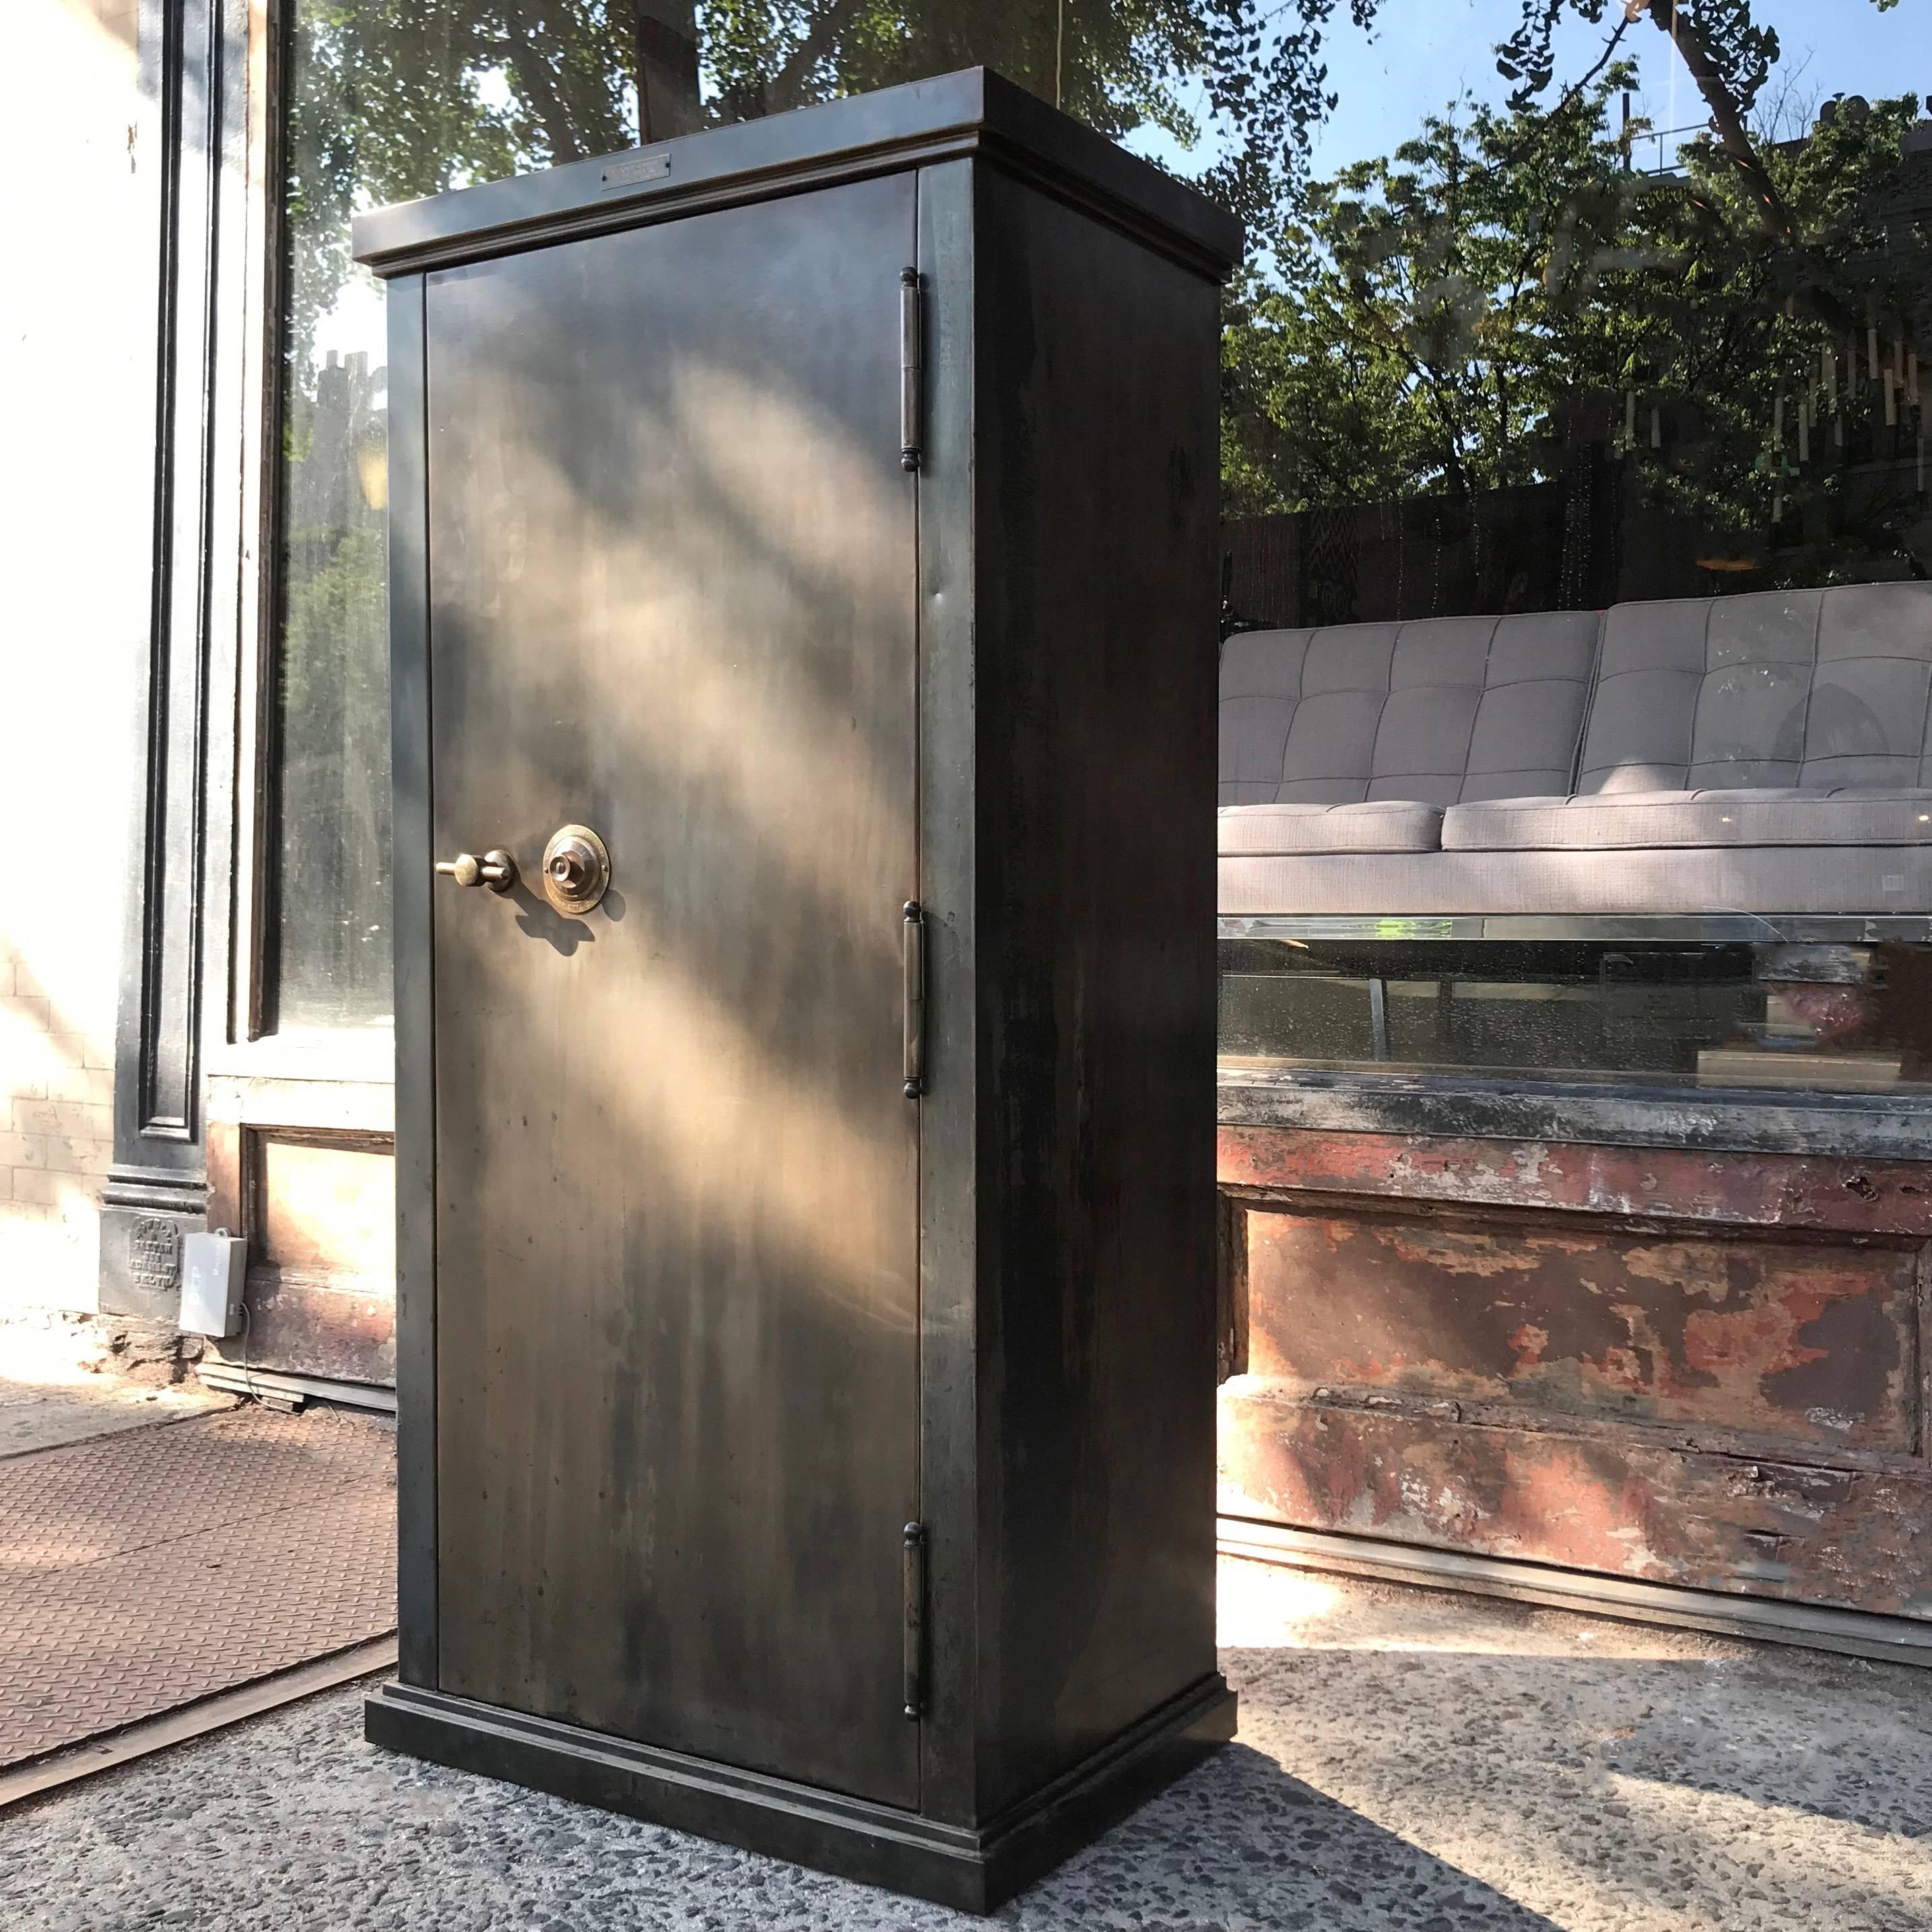 Stately, early 20th century, safe cabinet by The Safe Cabinet Co, Marietta OH features a newly finished, gunmetal steel exterior with brass handle and combination lock and original paint interior with adjustable shelves.